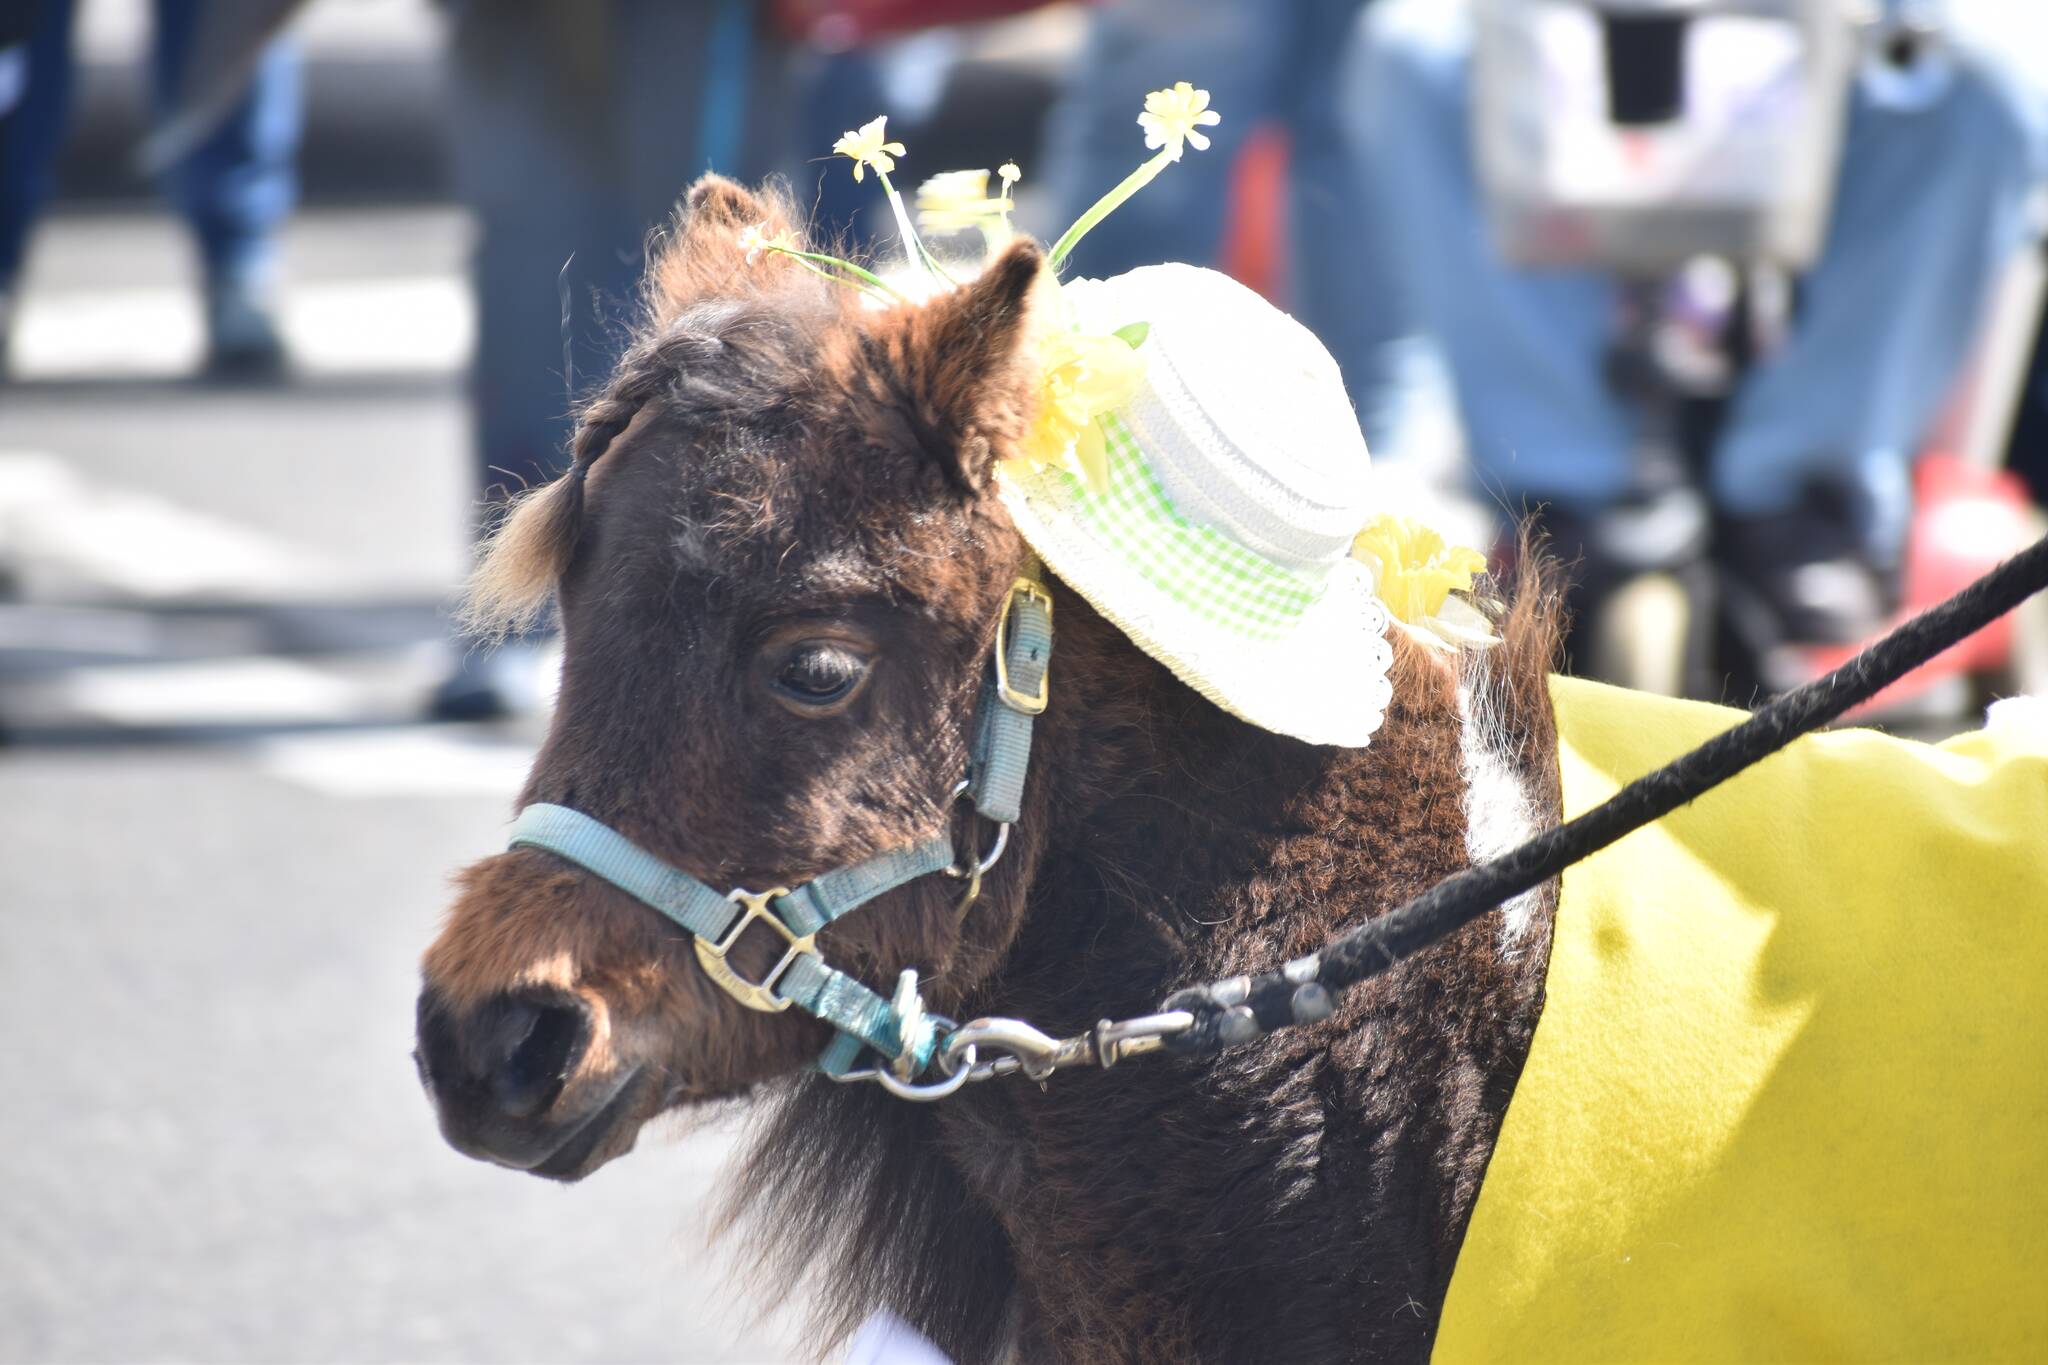 Ponies, horses, donkeys, goats and dogs were among the animals that joined the parade. Photo by Alex Bruell